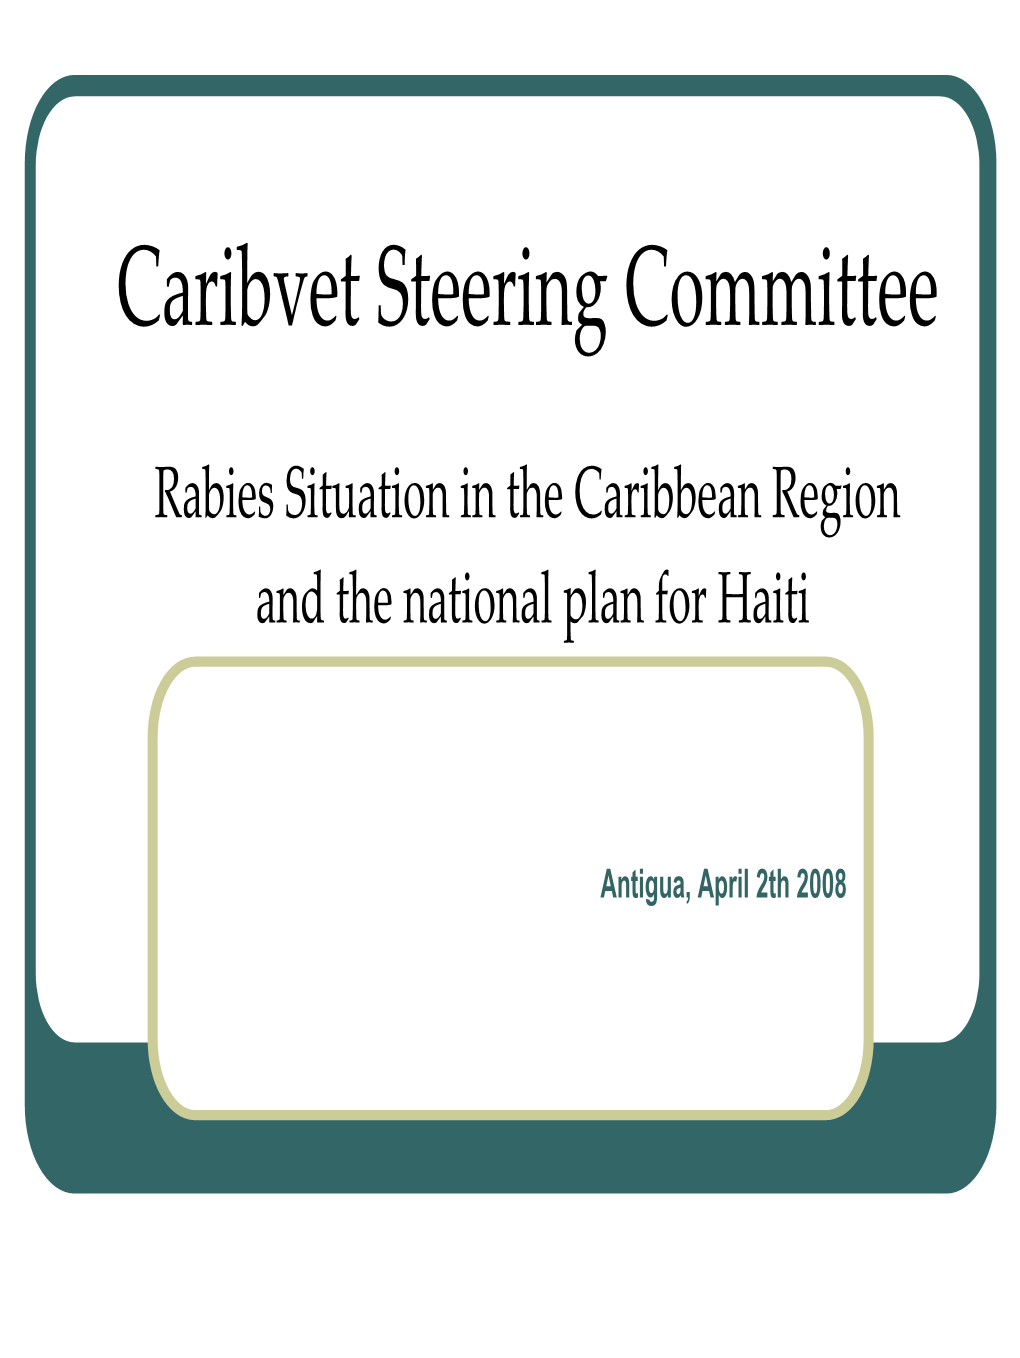 Rabies Situation in the Caribbean Region and the National Plan for Haiti